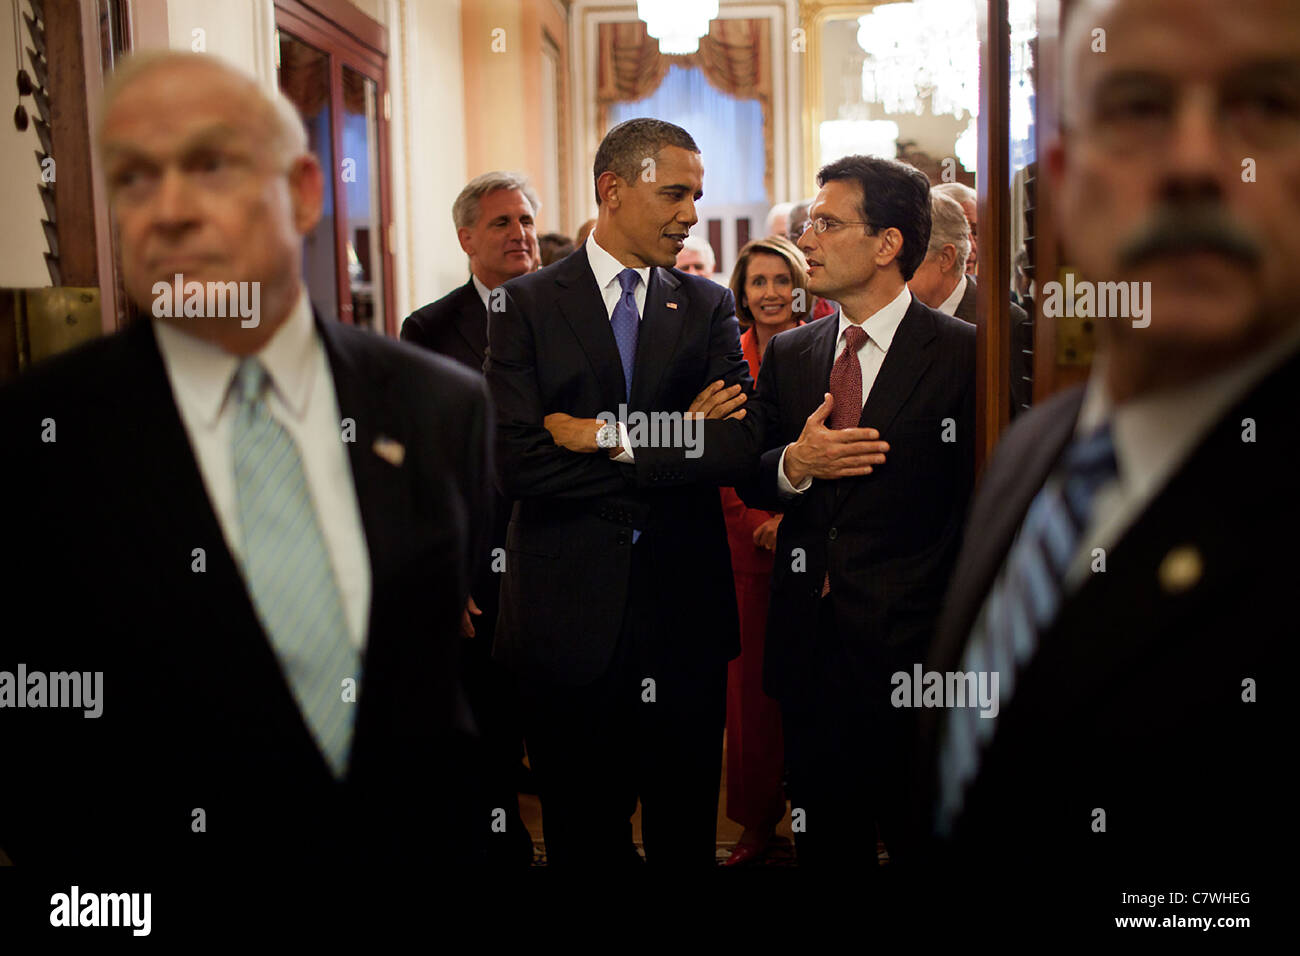 President Barack Obama talks with Rep. Eric Cantor prior to entering the House Chamber of the U.S. Capitol Stock Photo